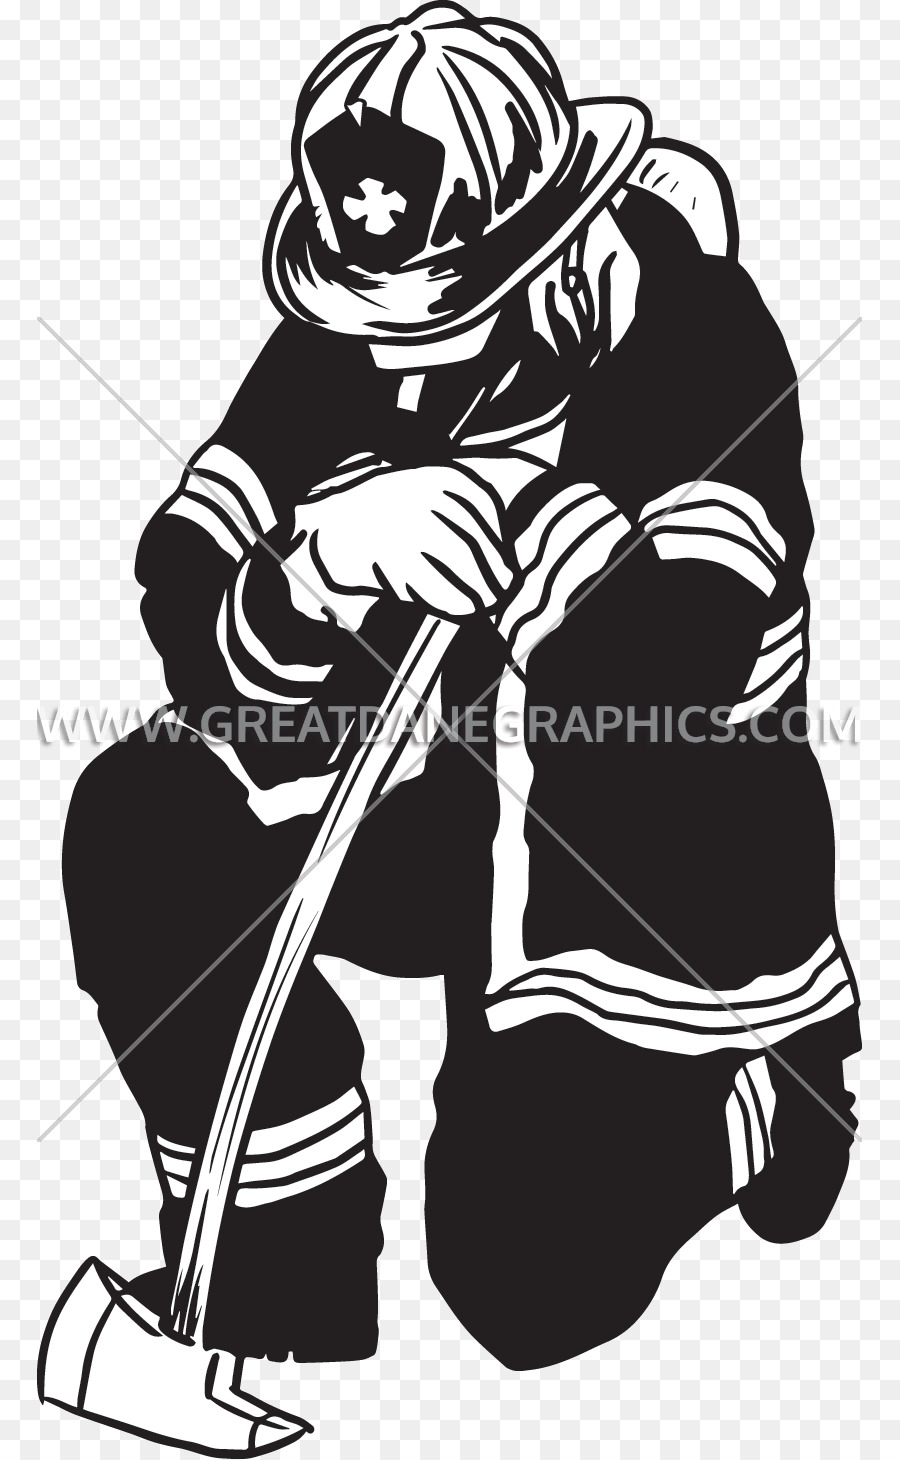 Firefighter Drawing Black and white Clip art - firefighter png download - 825*1459 - Free Transparent Firefighter png Download.